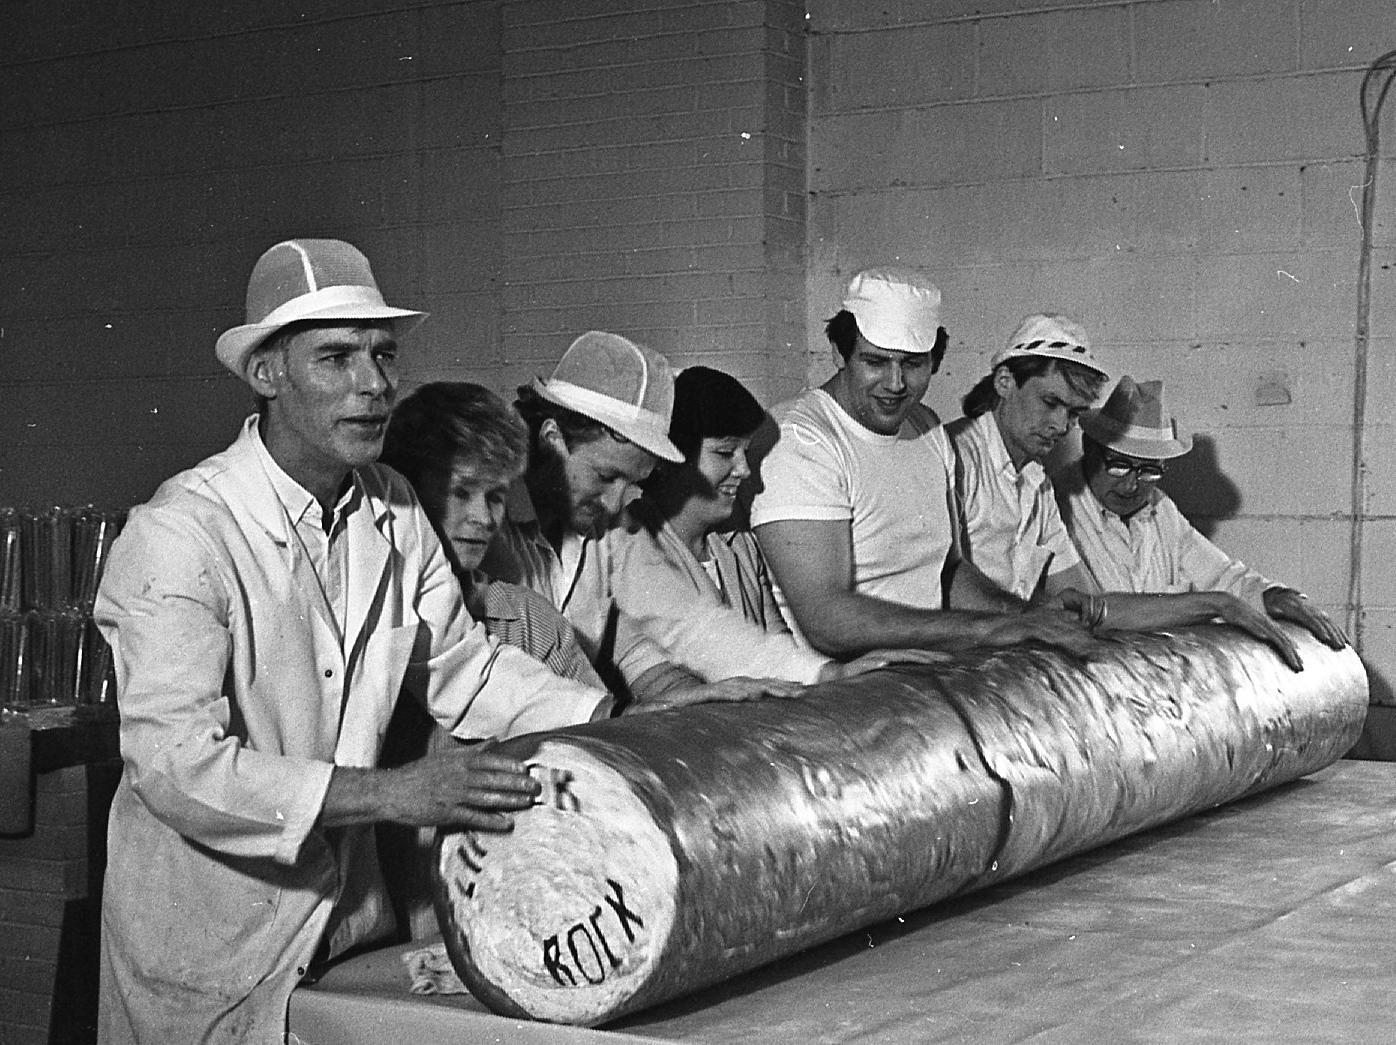 This giant stick of candy is a rock solid record. The 500lb monster is set to enter the Guinness Book of Records as the largest rock around. Nine feet, two inches long and 14 1/2 inches thick, the rock rolled off the production line at Blackpool's Fylde Confectionery Company after a marathon cooling session. The rock will help raise cash for the Children in Need appeal in the summer